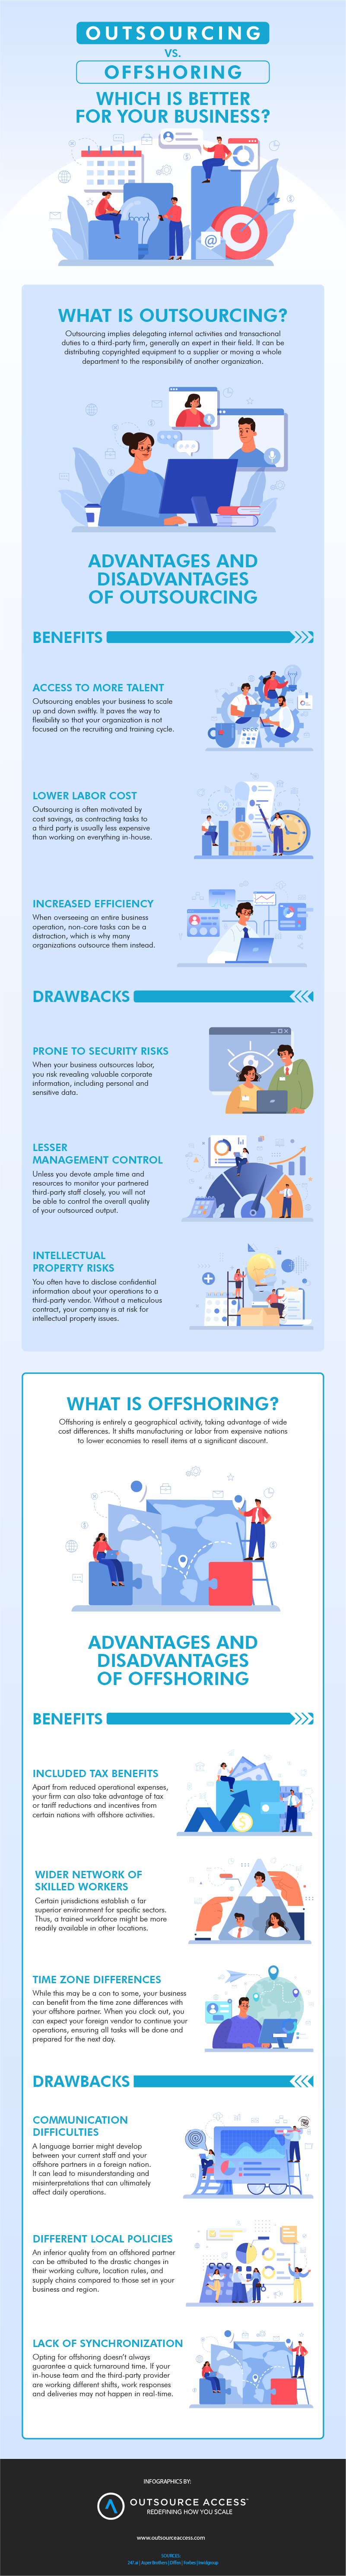 Outsource Access Info7 Infographic - Outsourcing vs. Offshoring